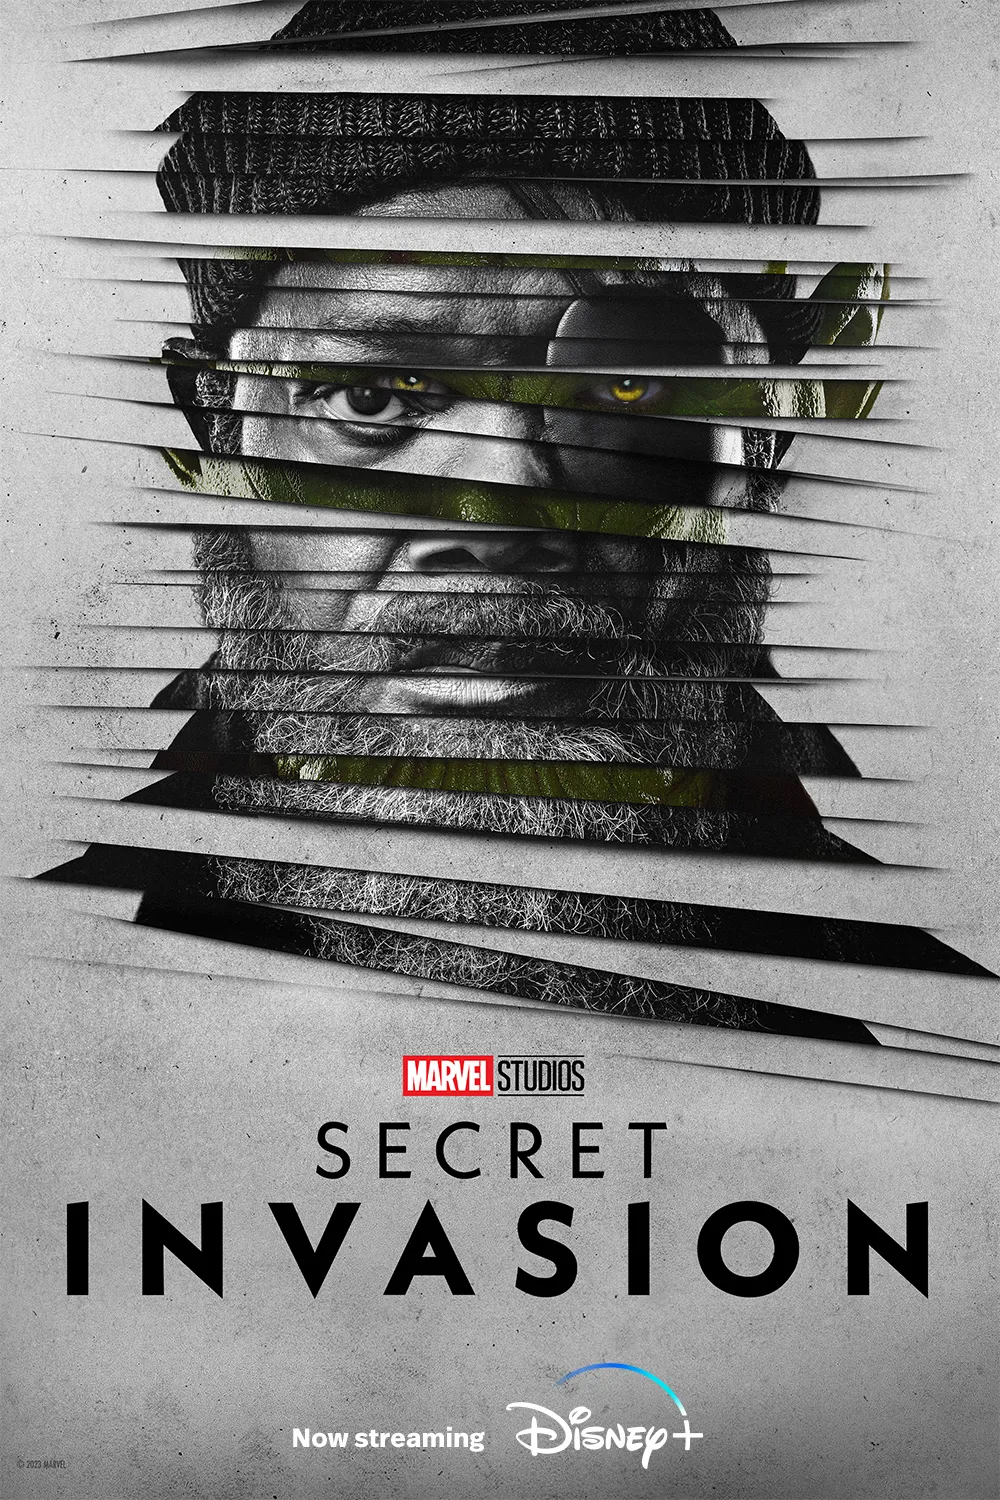 Marvel's Secret Invasion on Disney+ TV show poster: Skrulls have infiltrated every level of society, including S.H.I.E.L.D., and Nick Fury must race against time to stop them before it's too late.